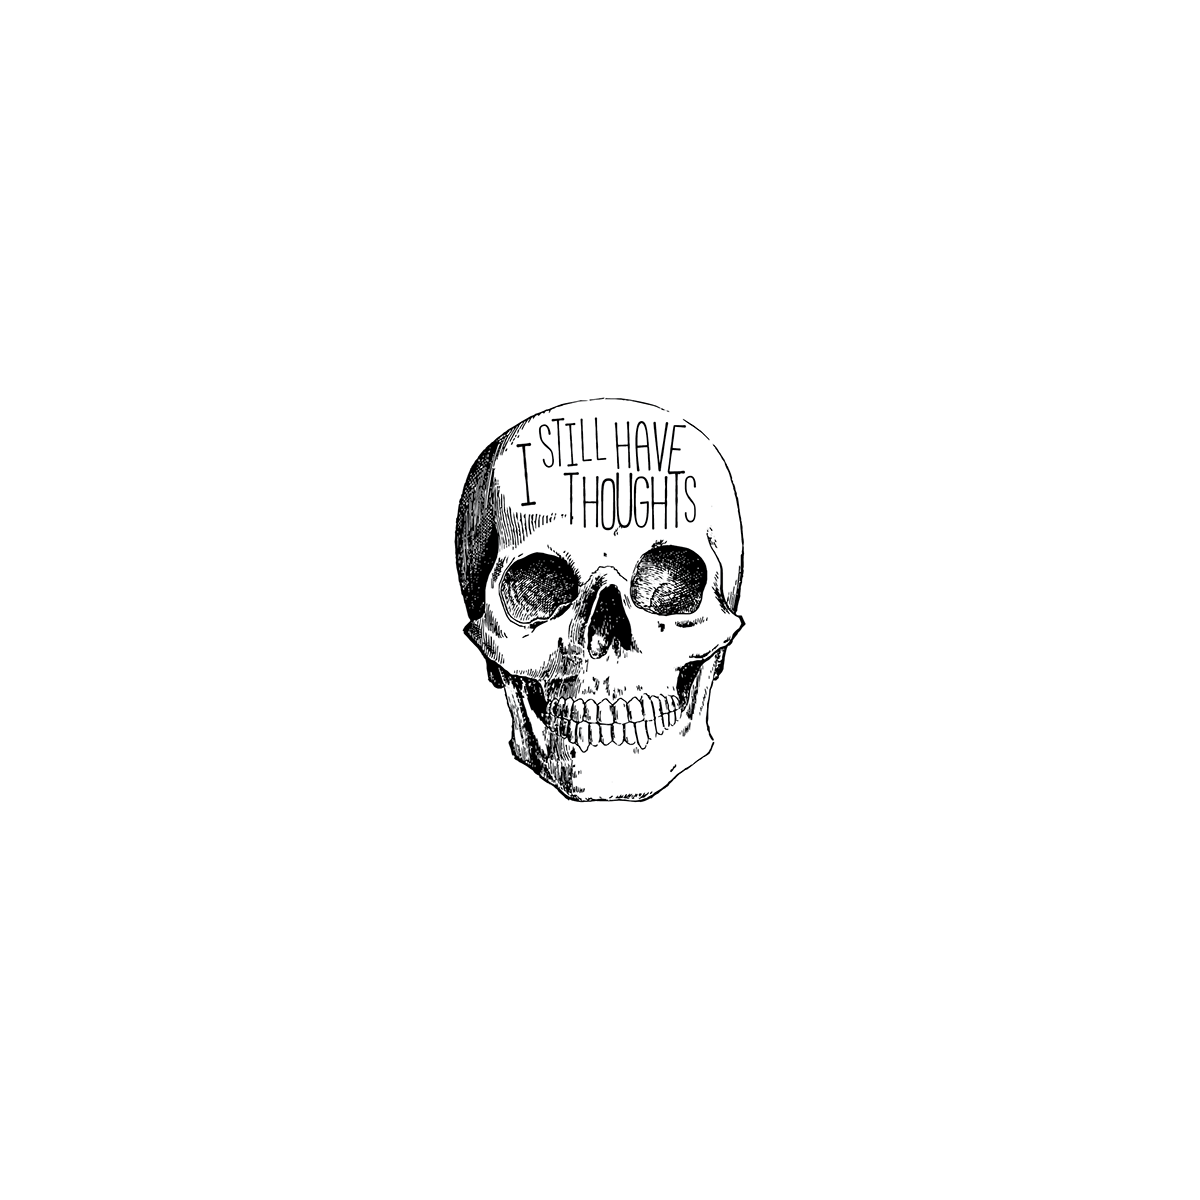 Thoughts of Skulls on Behance